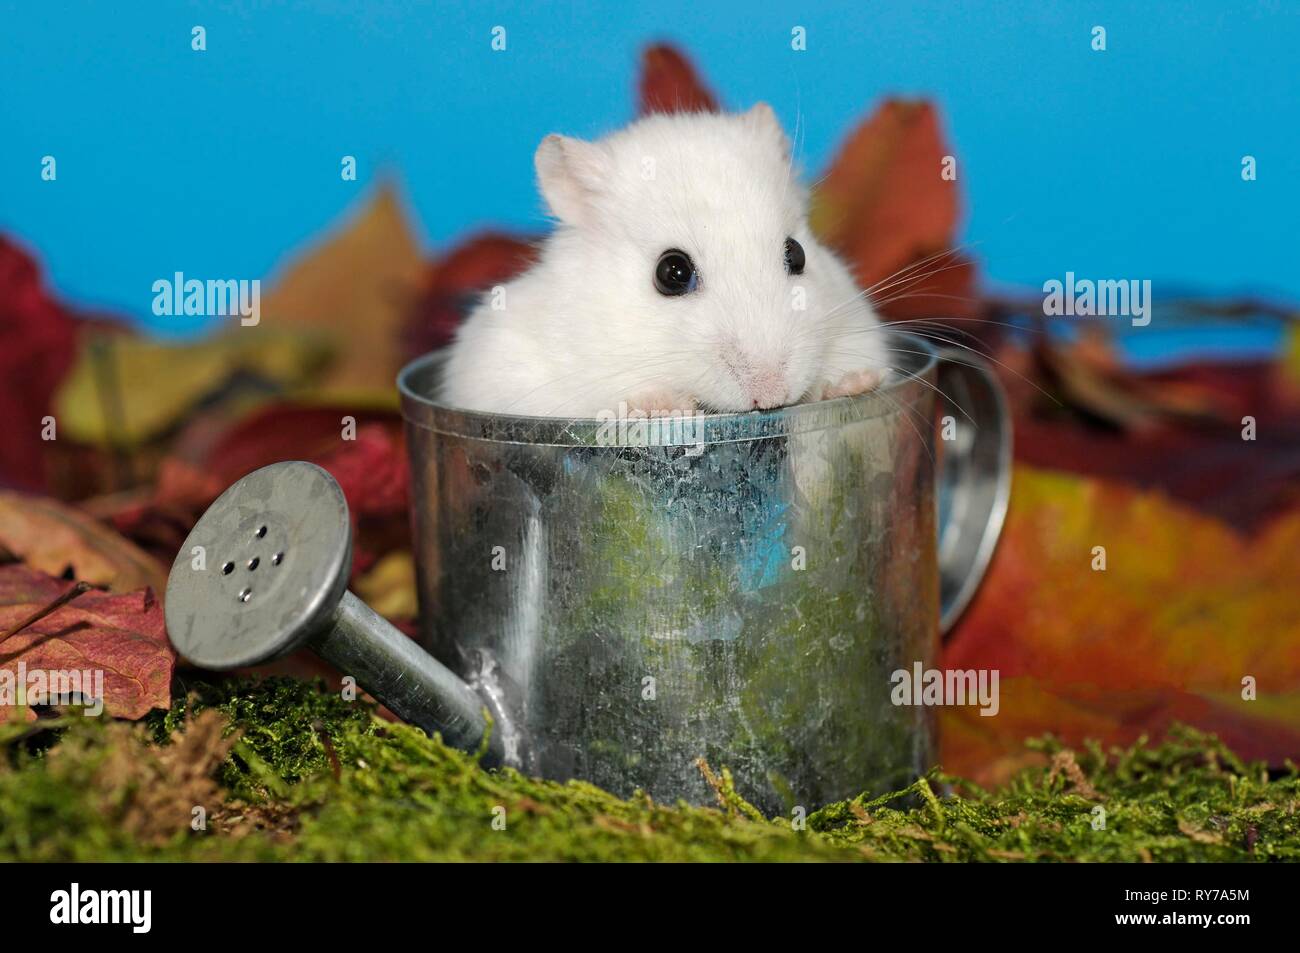 Dsungarian dwarf hamster, white, sitting in a small watering can in front of autumn leaves, Austria Stock Photo